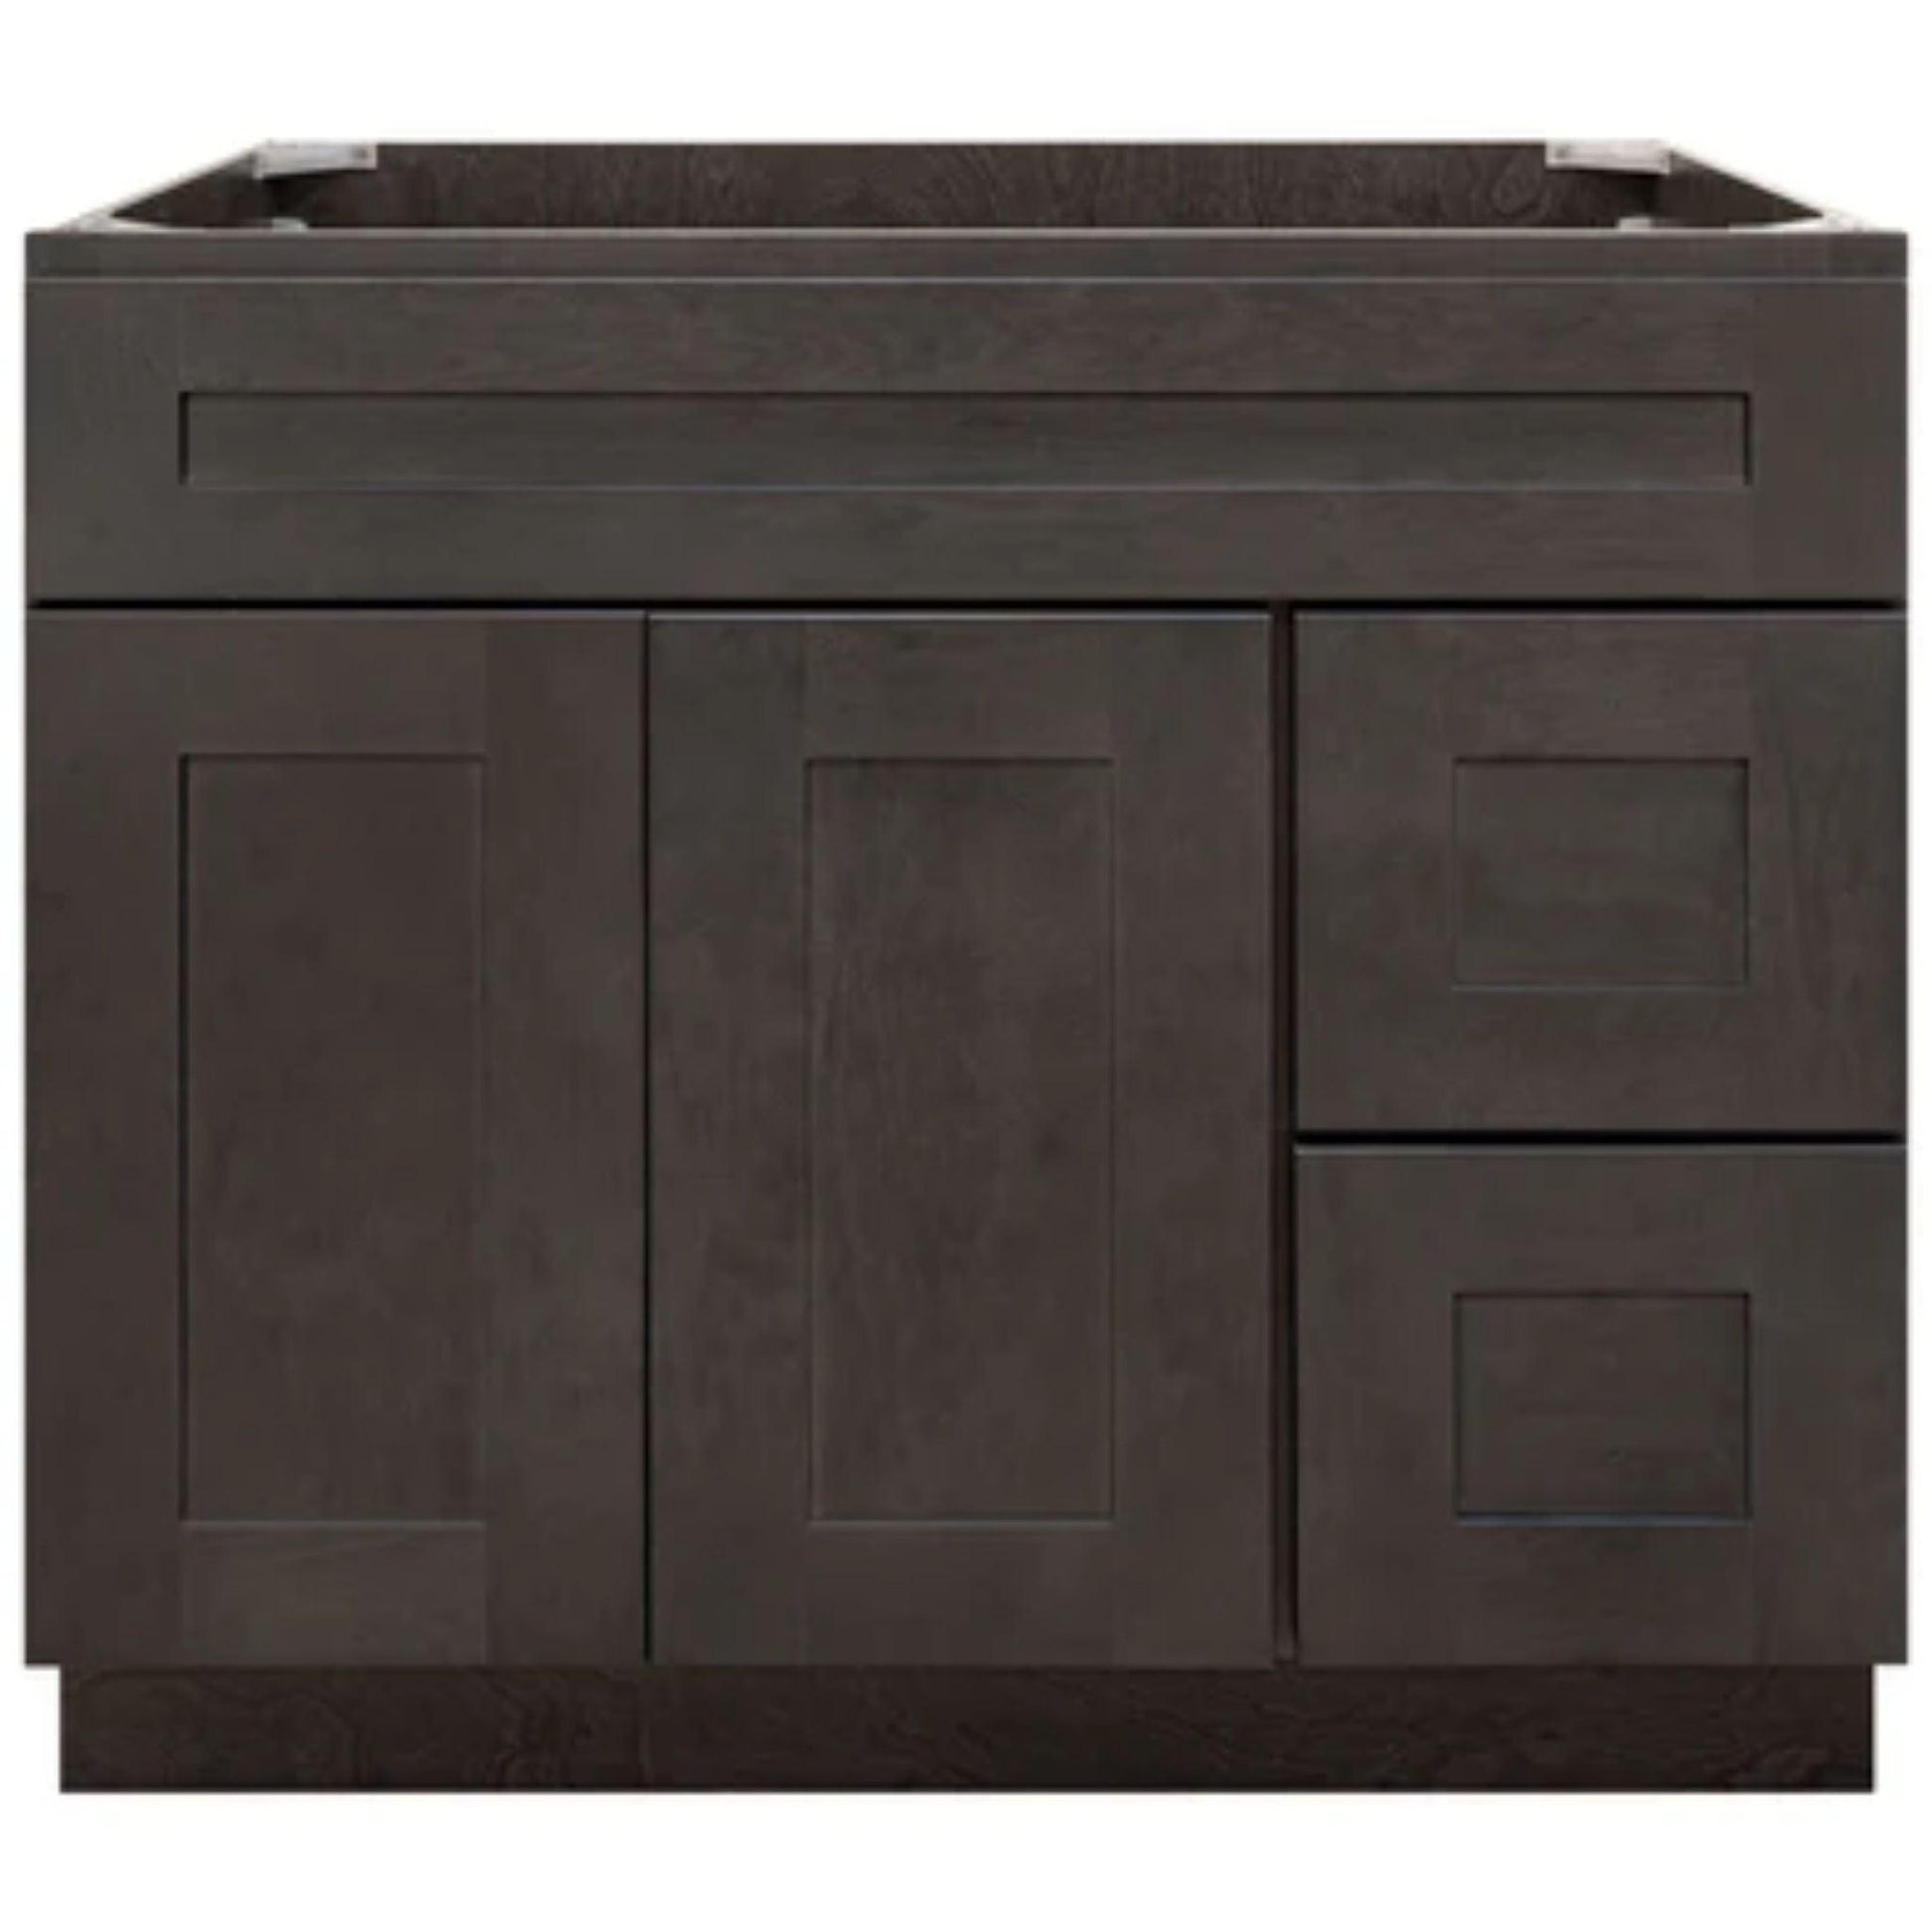 LessCare 36" x 21" x 34 1/2" Dover Gray Vanity Sink Base Cabinet with Right Drawers